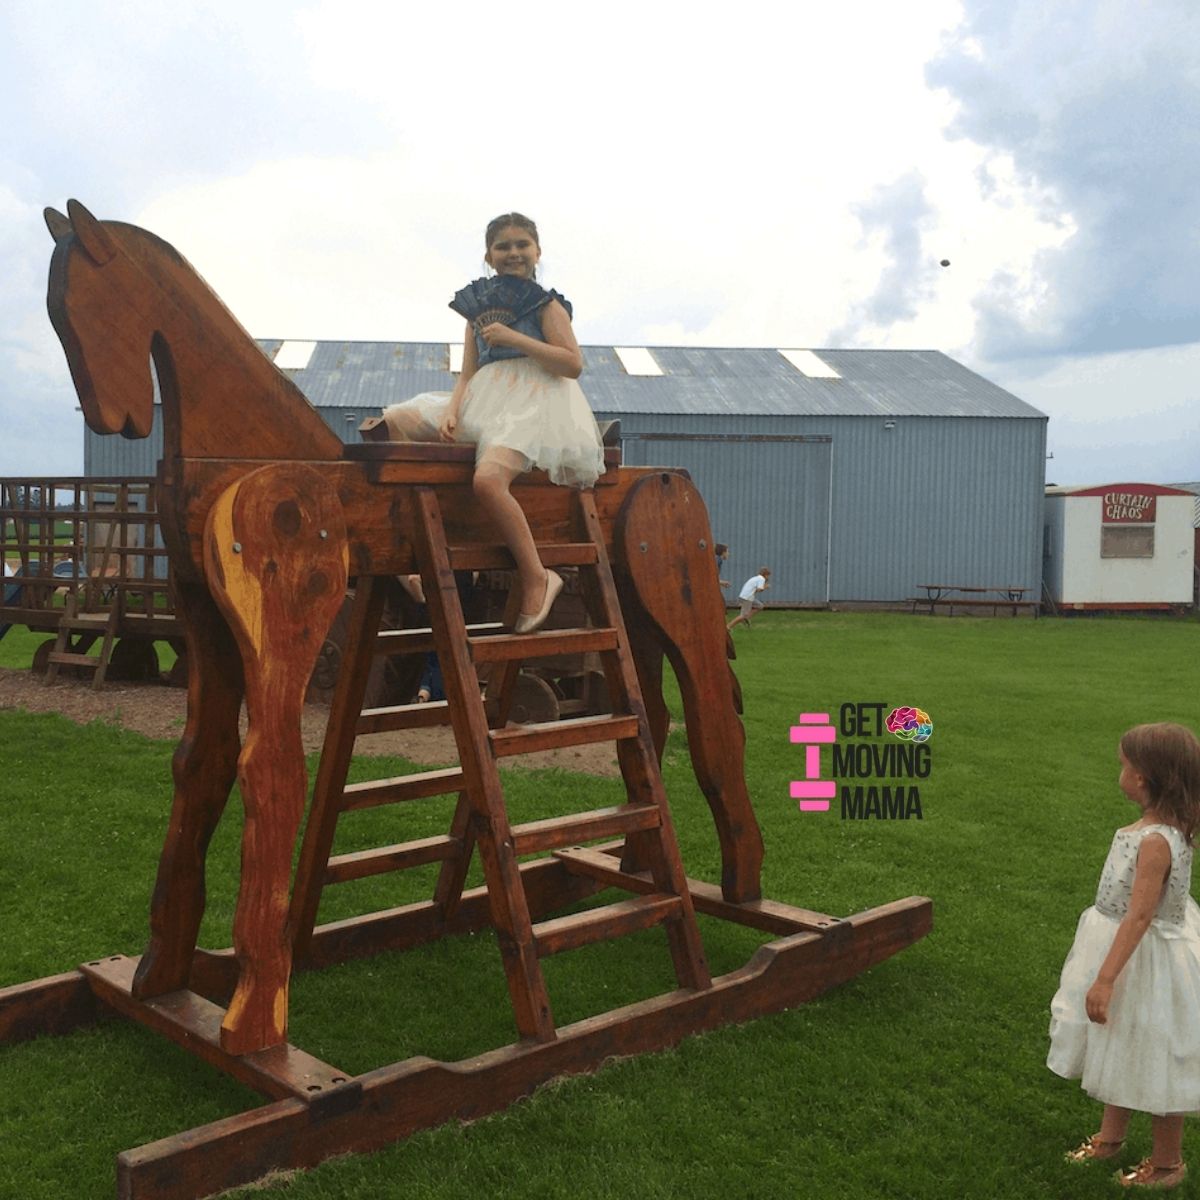 A picture of a girl sitting on a giant rocking horse at an outdoor wedding.